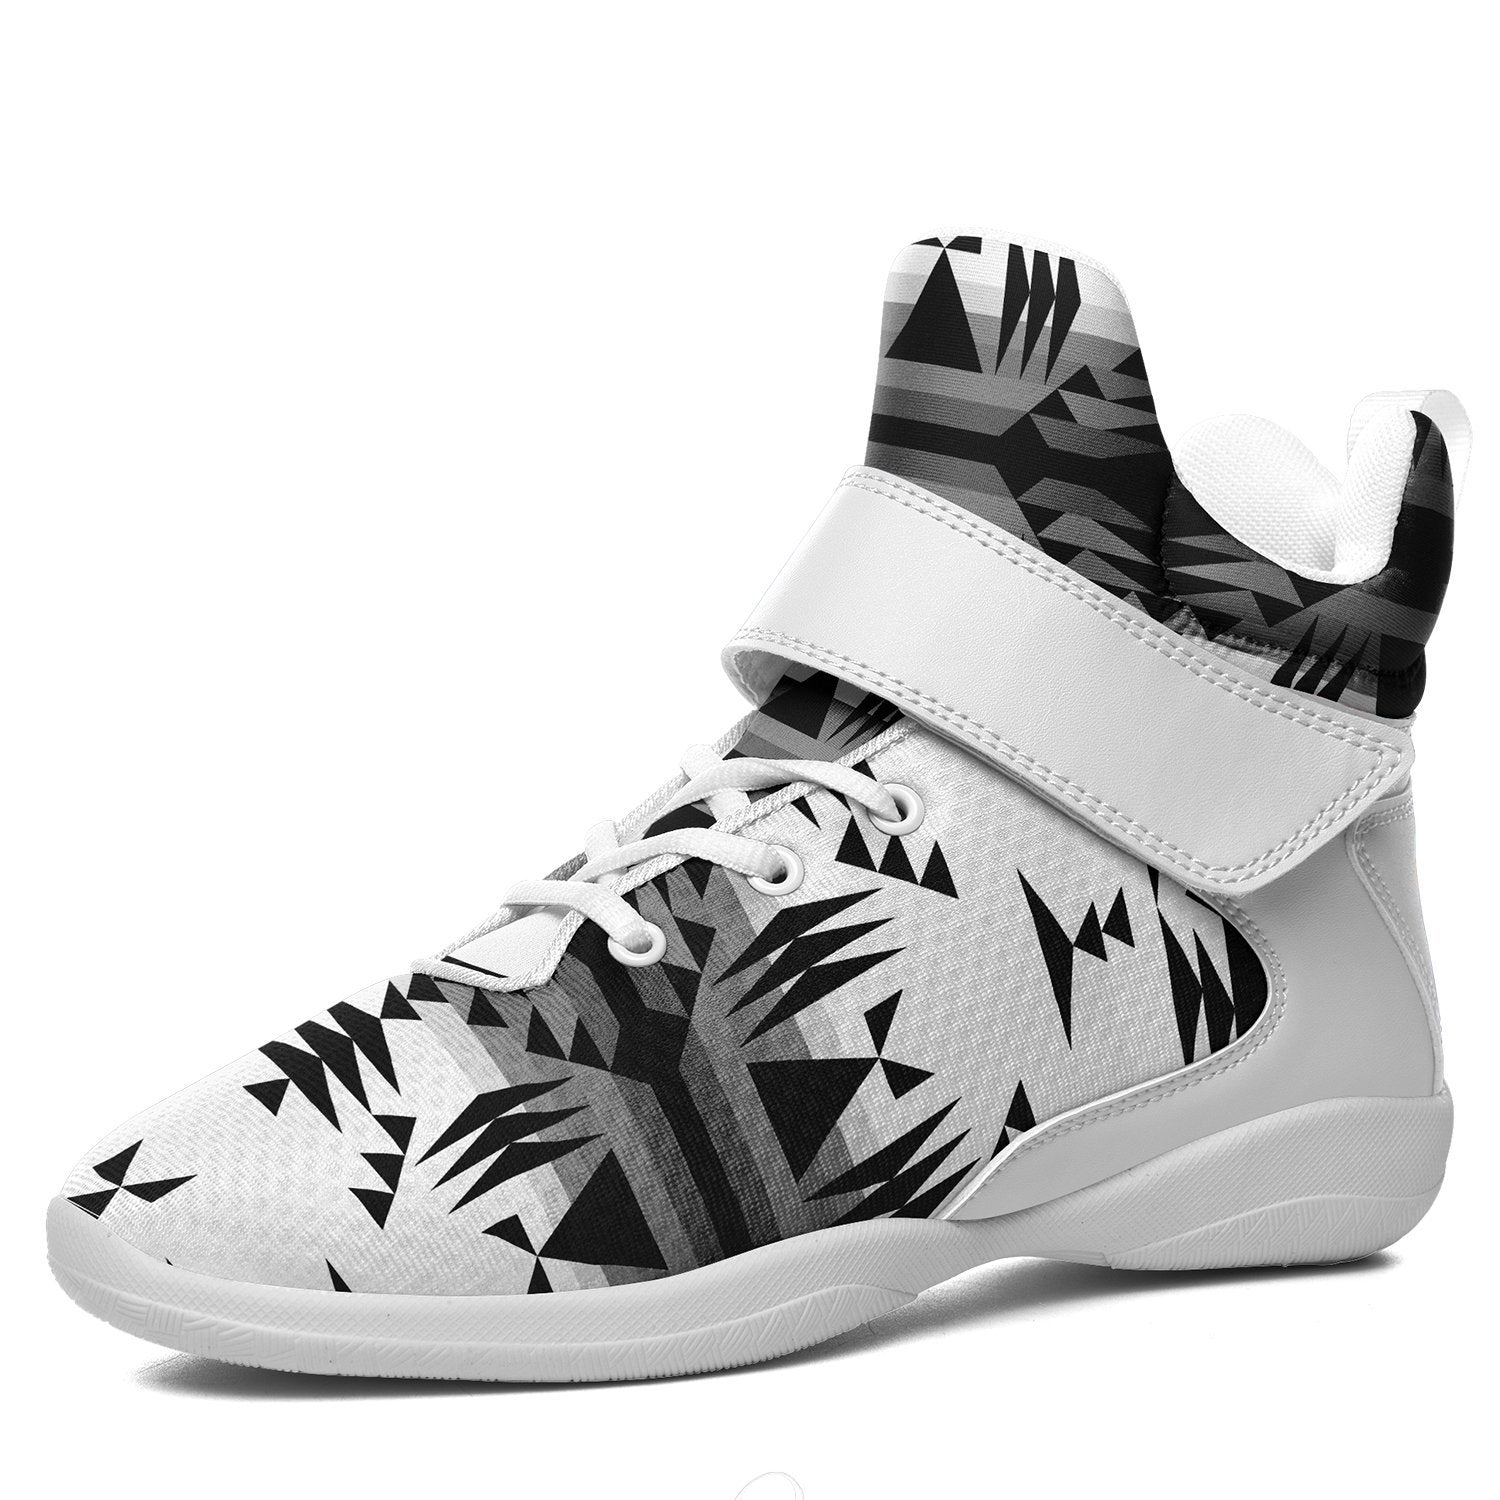 Between the Mountains White and Black Kid's Ipottaa Basketball / Sport High Top Shoes 49 Dzine US Child 12.5 / EUR 30 White Sole with White Strap 